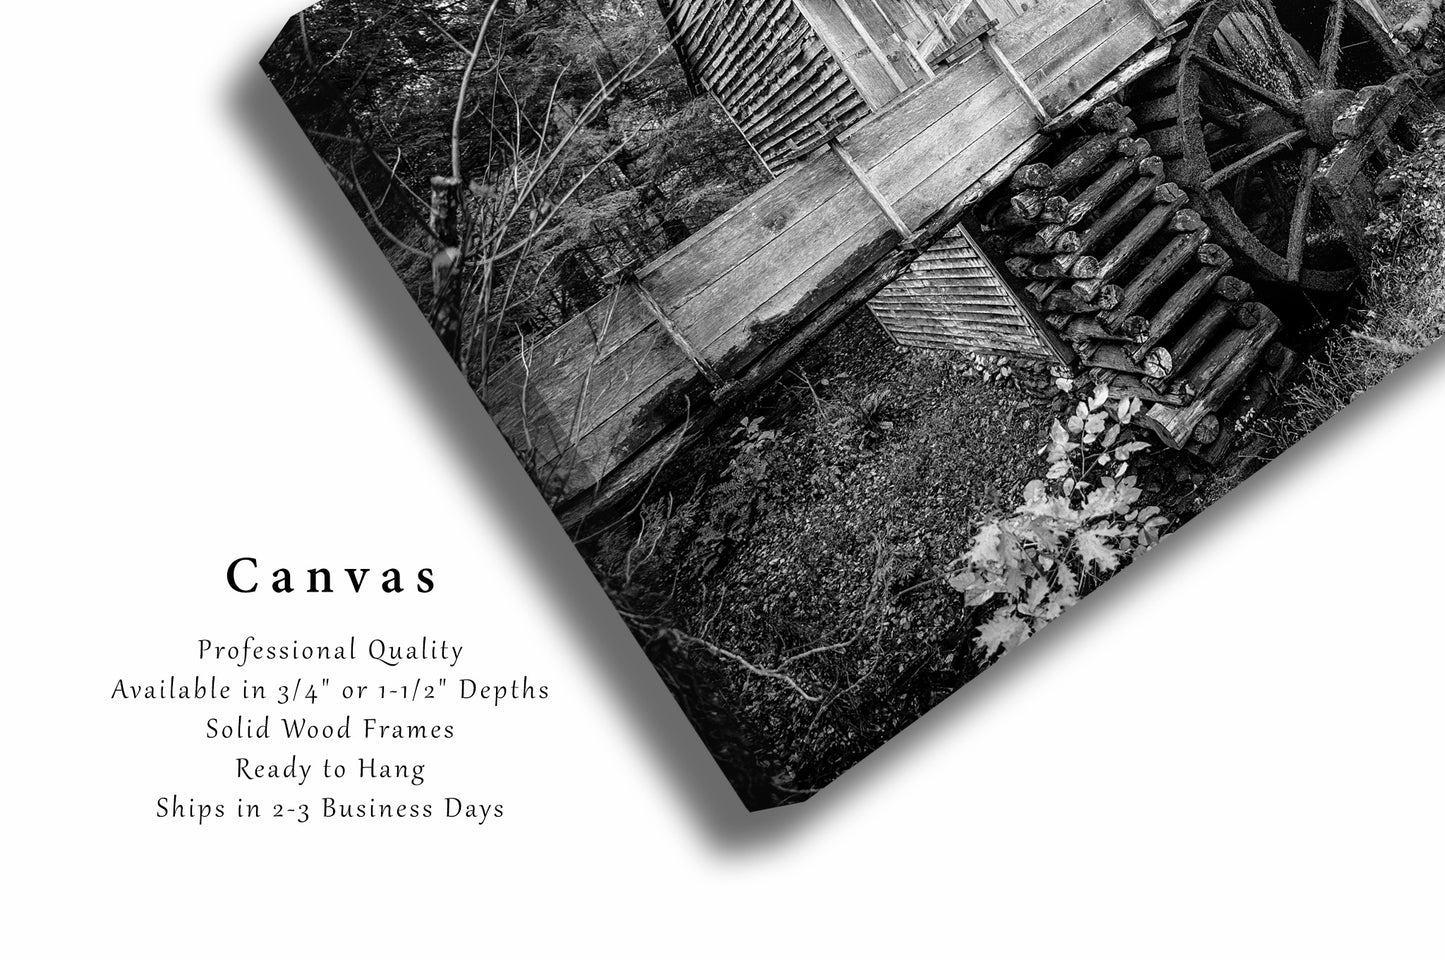 John Cable Mill Canvas | Black and White Gallery Wrap | Cades Cove Photography | Tennessee Wall Art | Great Smoky Mountains Decor | Ready to Hang